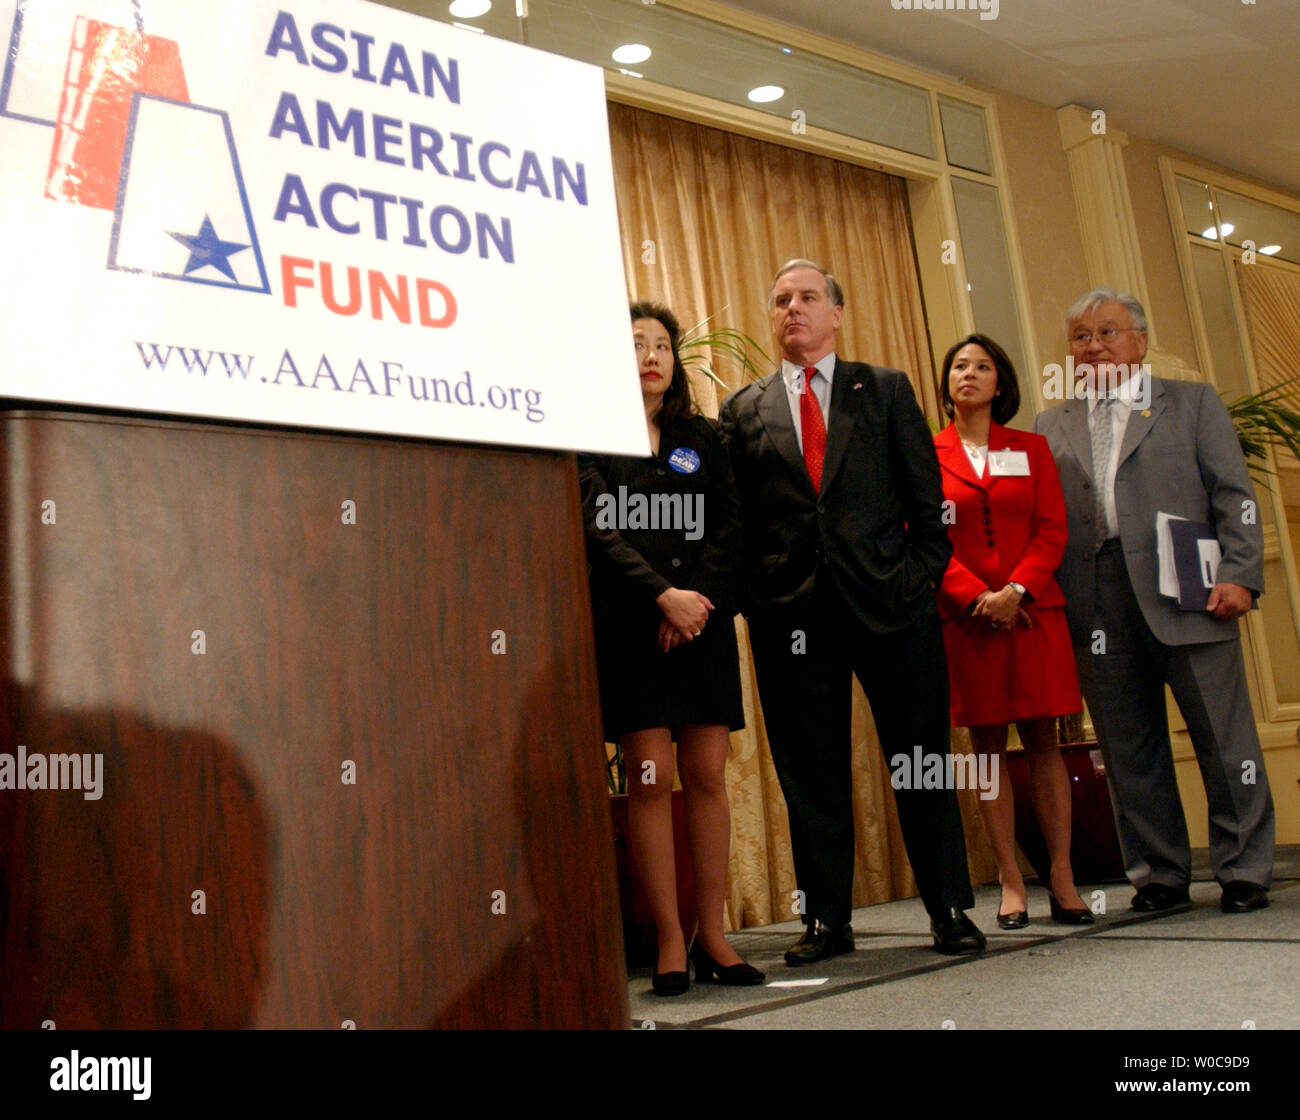 Presidential hopeful Howard Dean prior to speaking with those gathered at an Asian American Action Fund event on November 17, 2003 in Washington.  Dean was supprised by the sudden and unexpected indorcement from Congressman David Wu, D-OR.   (UPI Photo/Michael Kleinfeld) Stock Photo